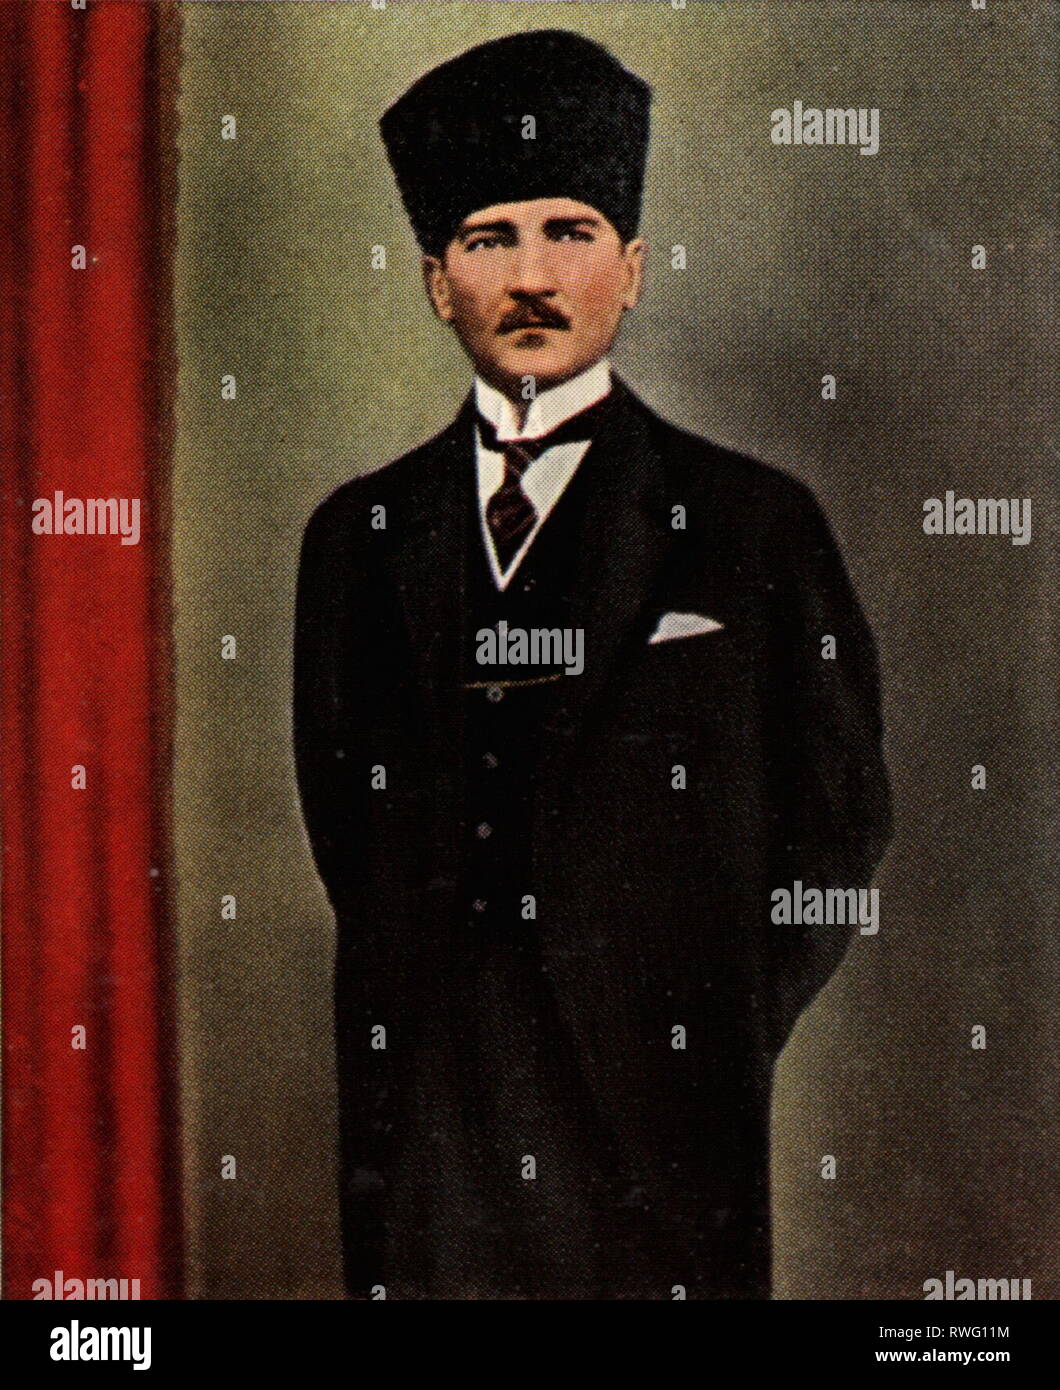 Kemal Pasha, Mustafa called Atatuerk, 12.3.1881 - 10.11.1938, Turkish politician, President of Turkey 29.10.1923 - 10.11.1938, half length, on the day of the proclamation of the Turkish Republic, 29.10.1923, coloured photograph, cigarette card, series 'Die Nachkriegszeit', 1935, Additional-Rights-Clearance-Info-Not-Available Stock Photo